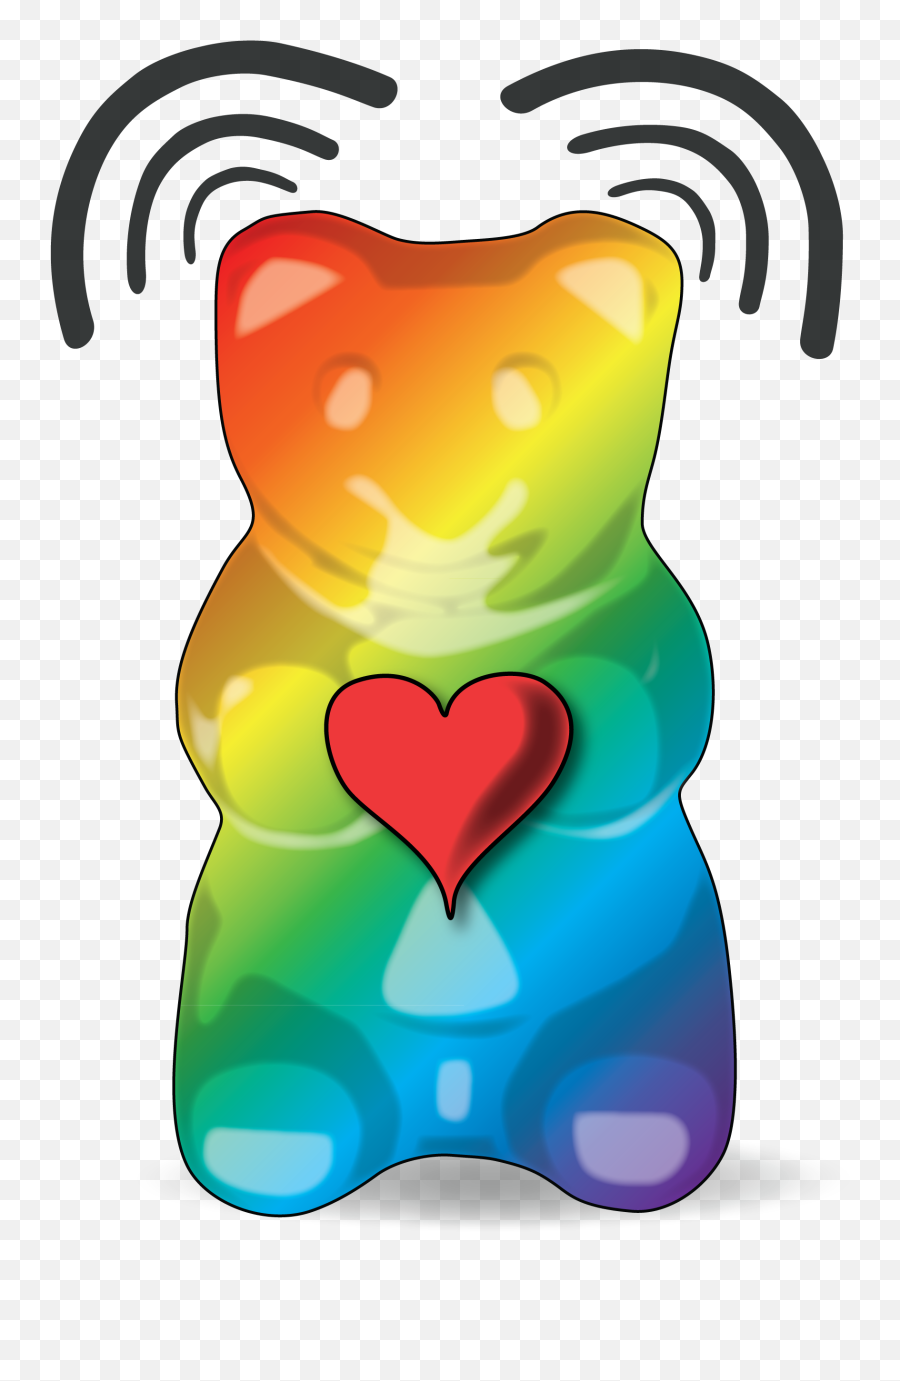 Colorful Gummy Bear Png 30426 - Free Icons And Png Backgrounds Cute Gummy Bears Cartoon,Colorful Png